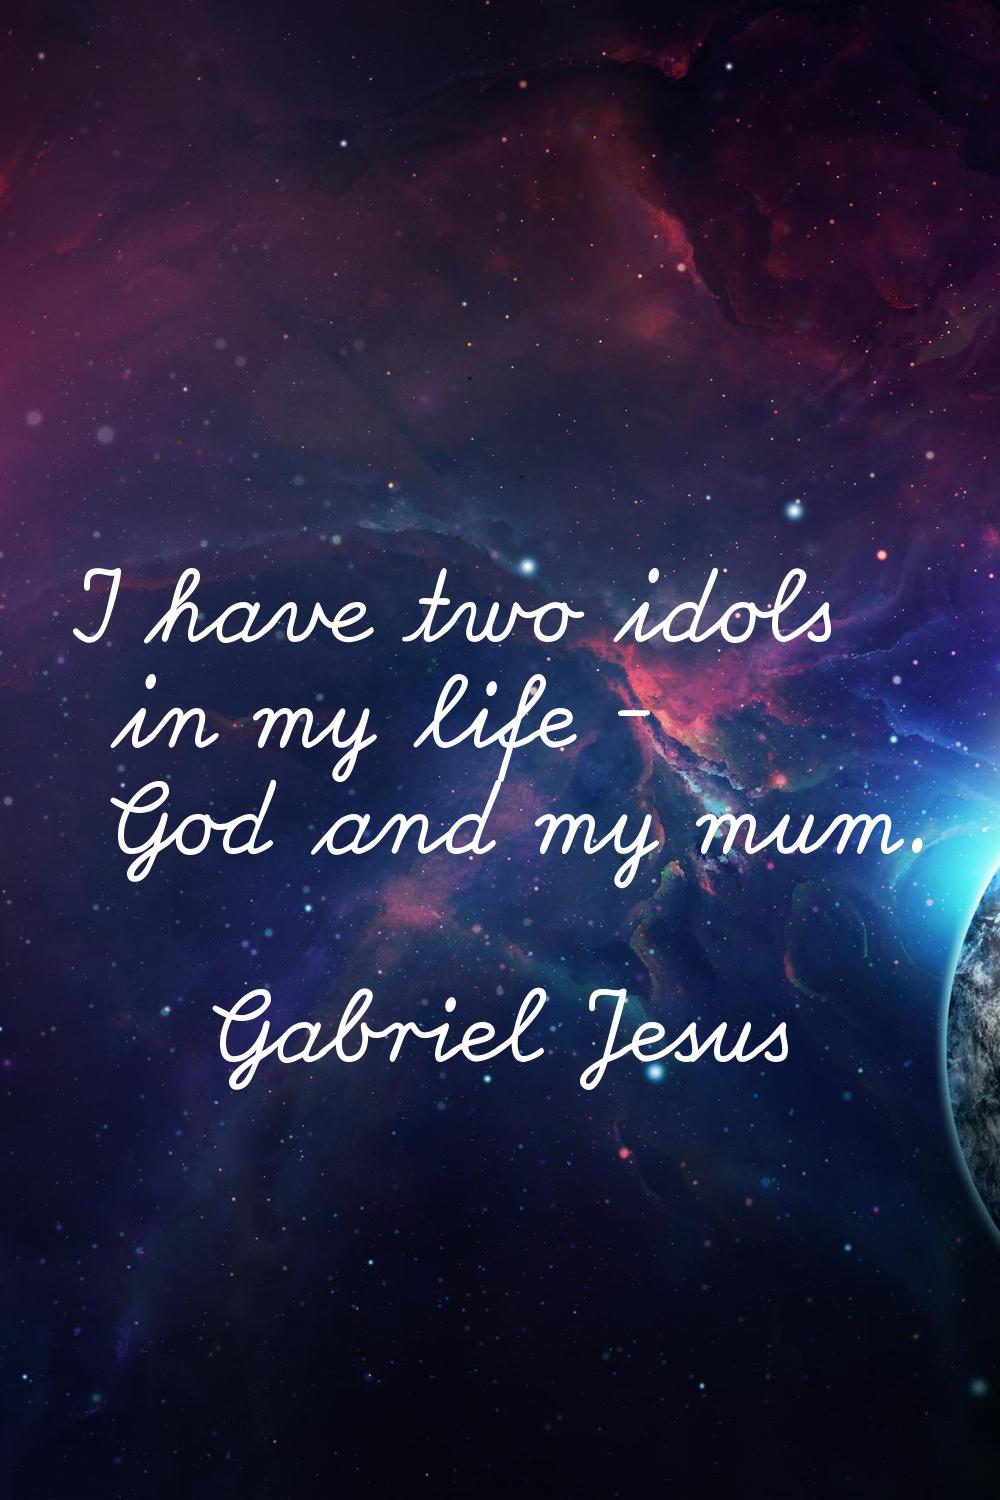 I have two idols in my life - God and my mum.